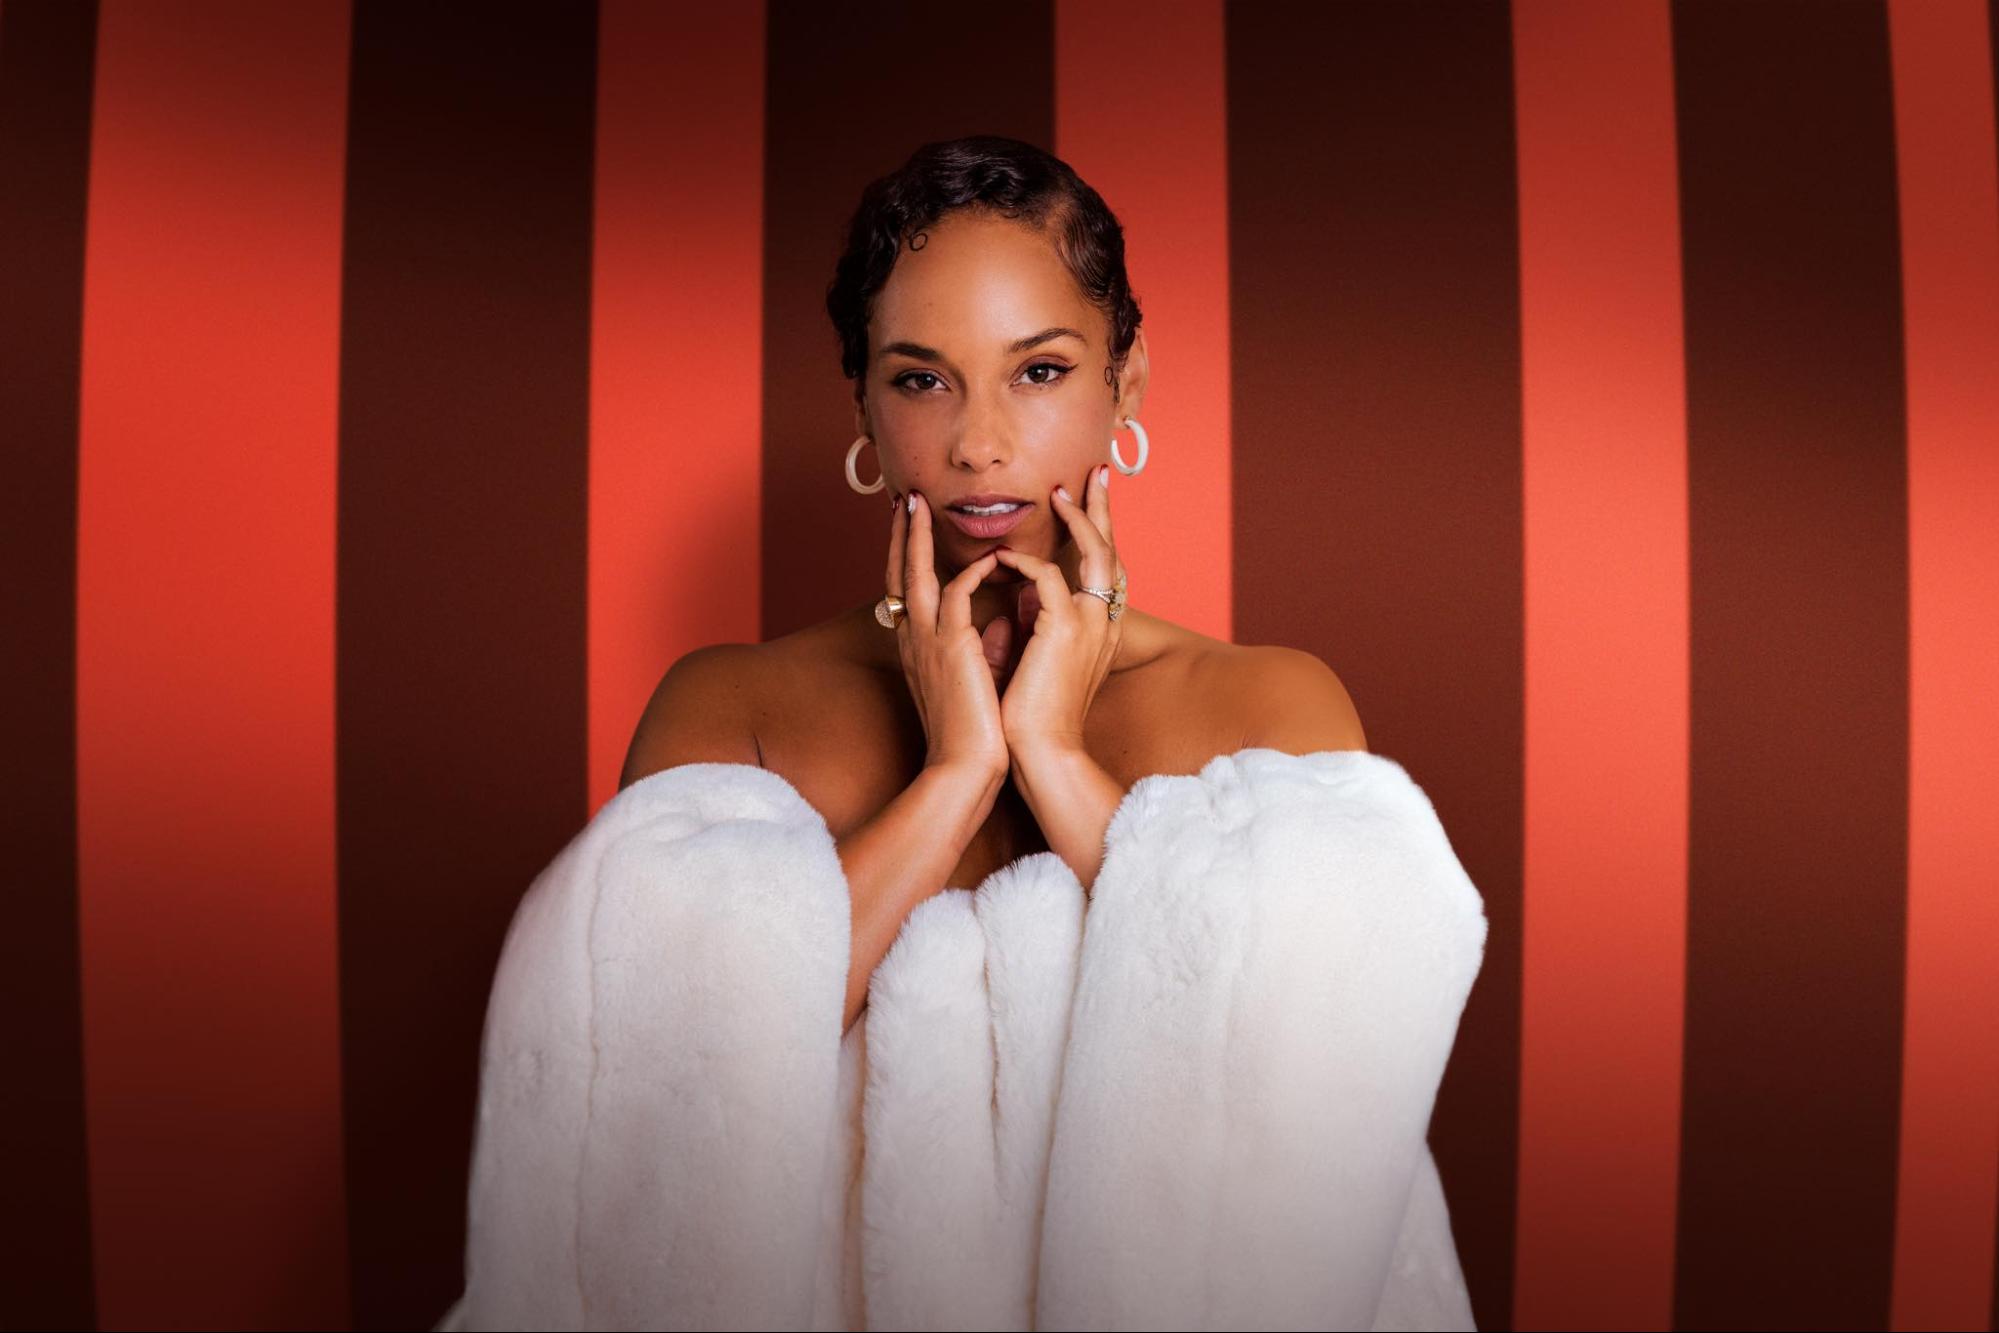 best love songs for valentine's day - alicia keys if i ain't got you